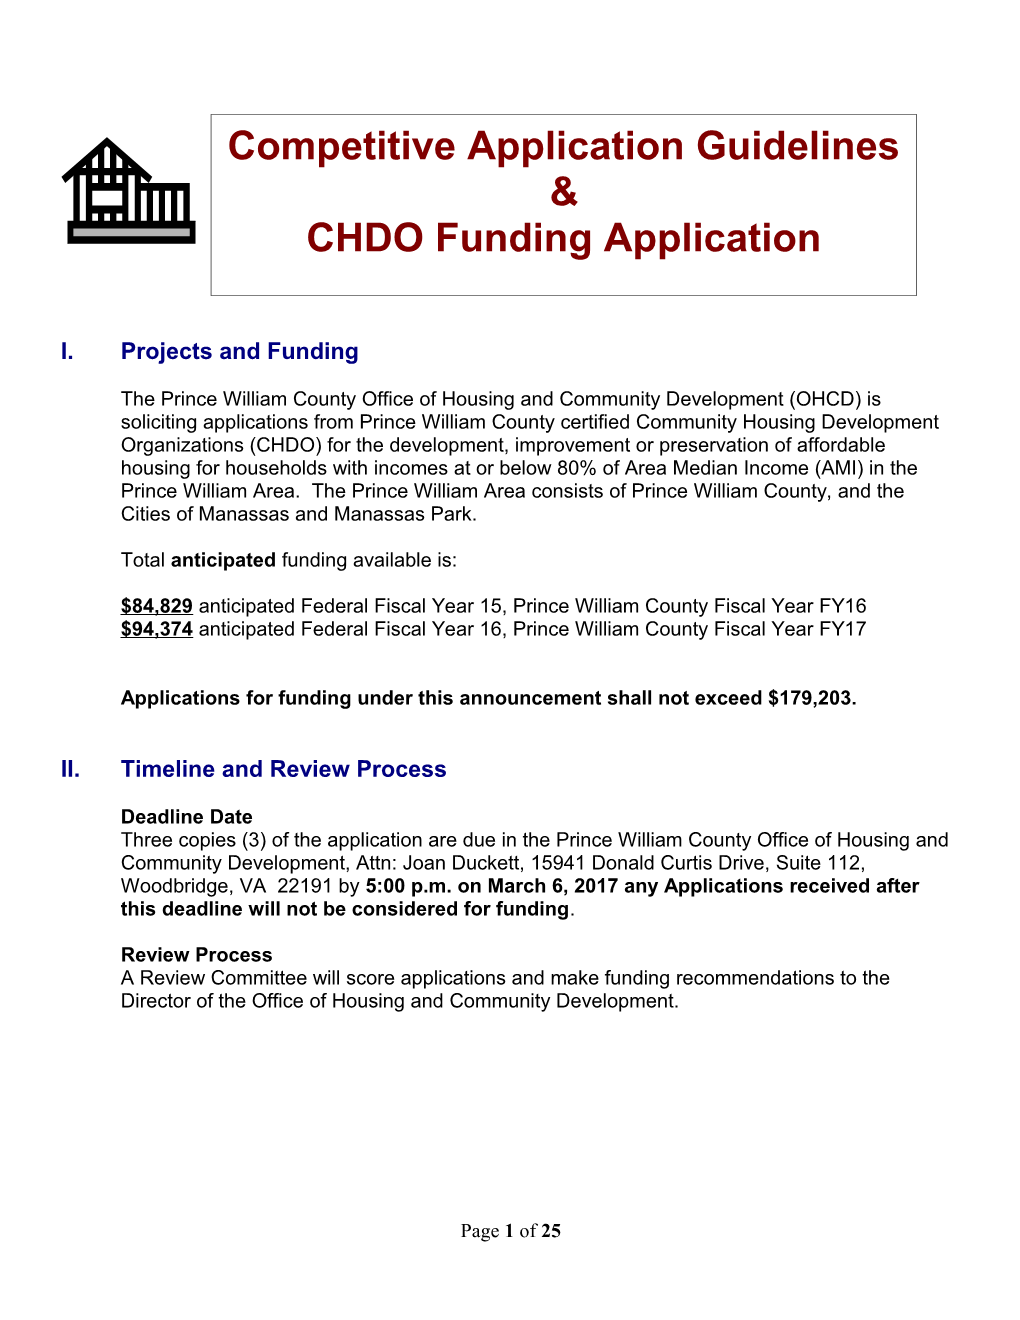 CHDO Application Guidelines FY17